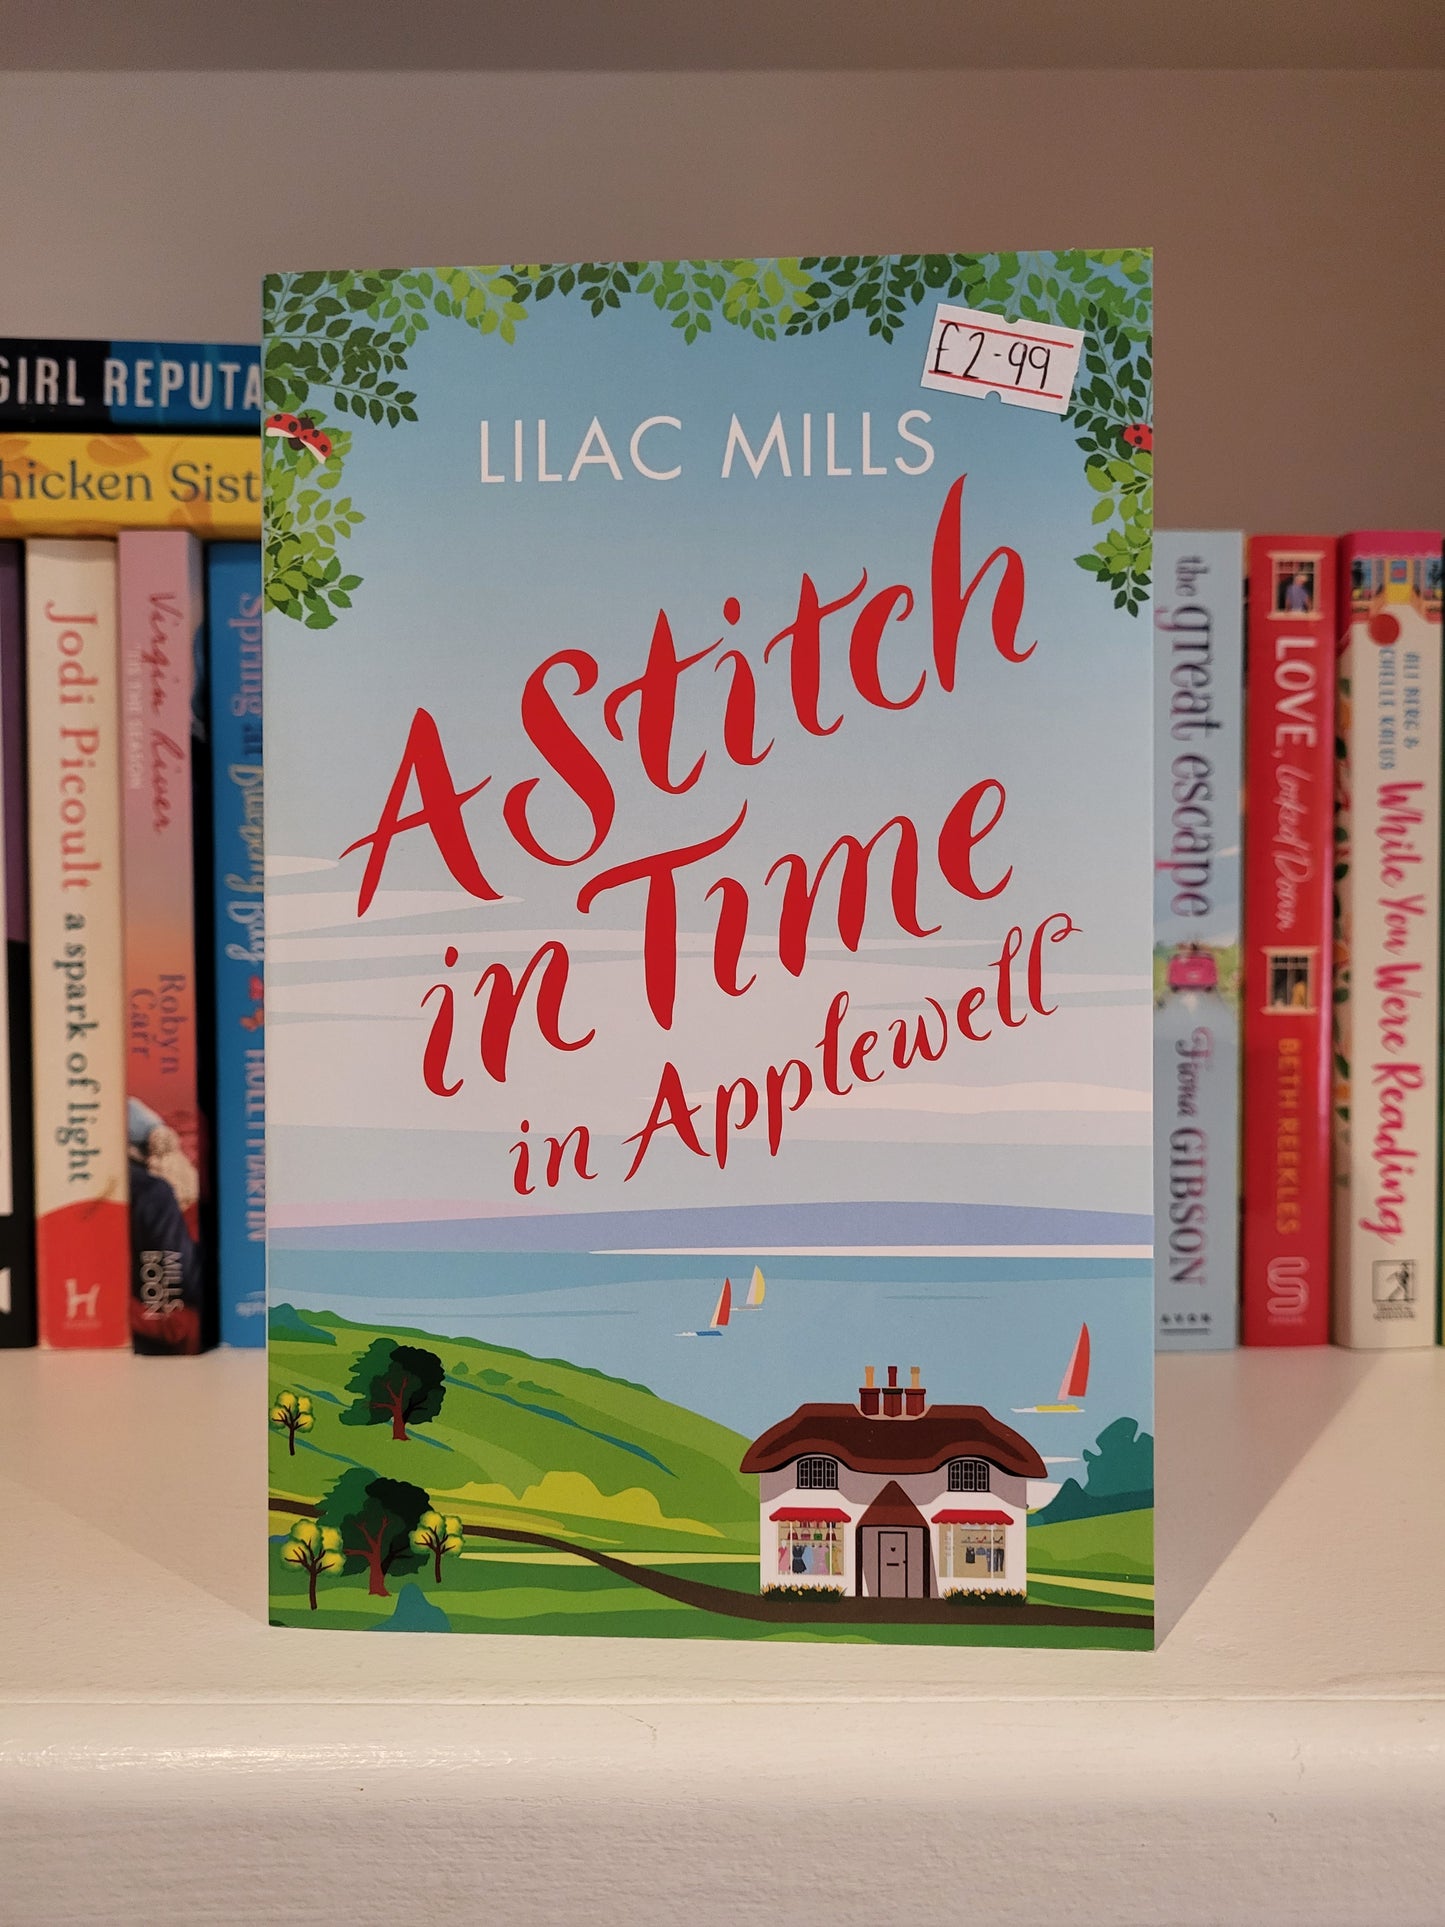 A Stitch in Time in Applewell - Lilac Mills